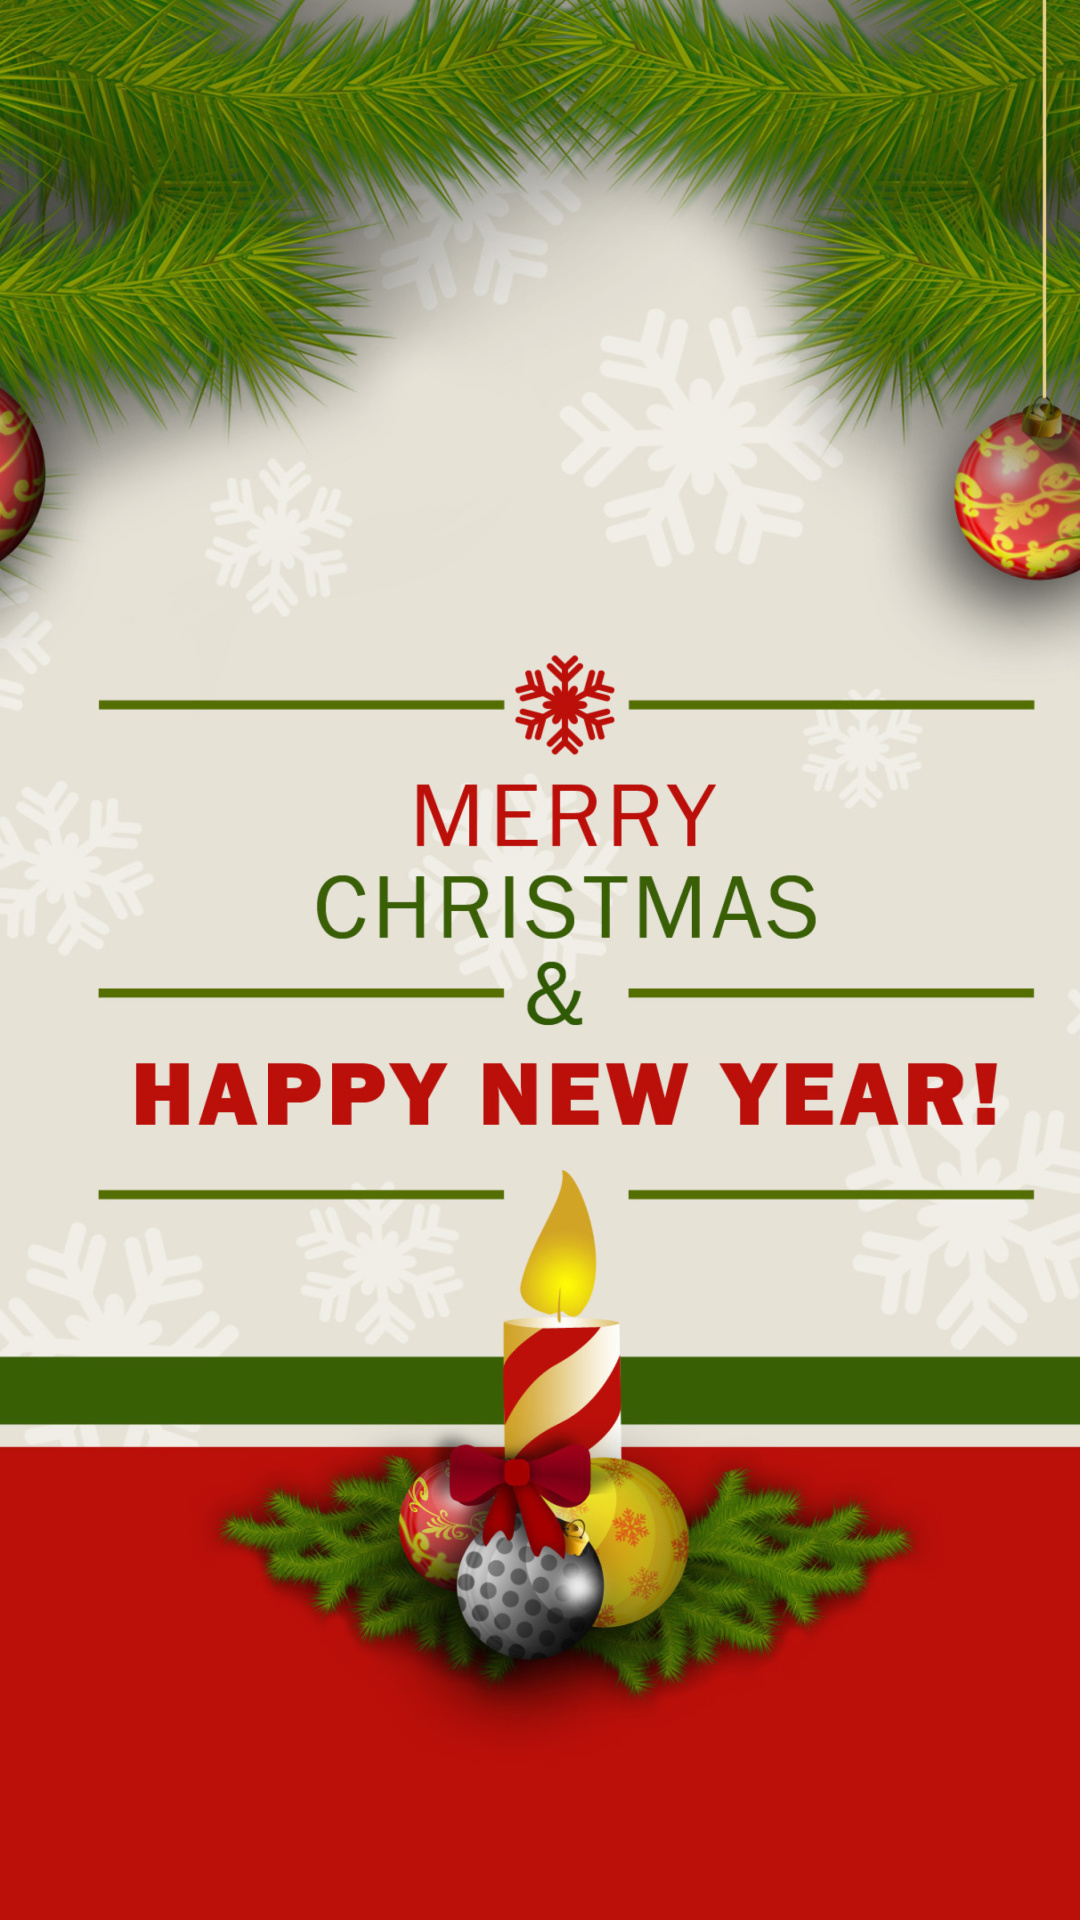 Merry Christmas and Happy New Year wallpaper 1080x1920